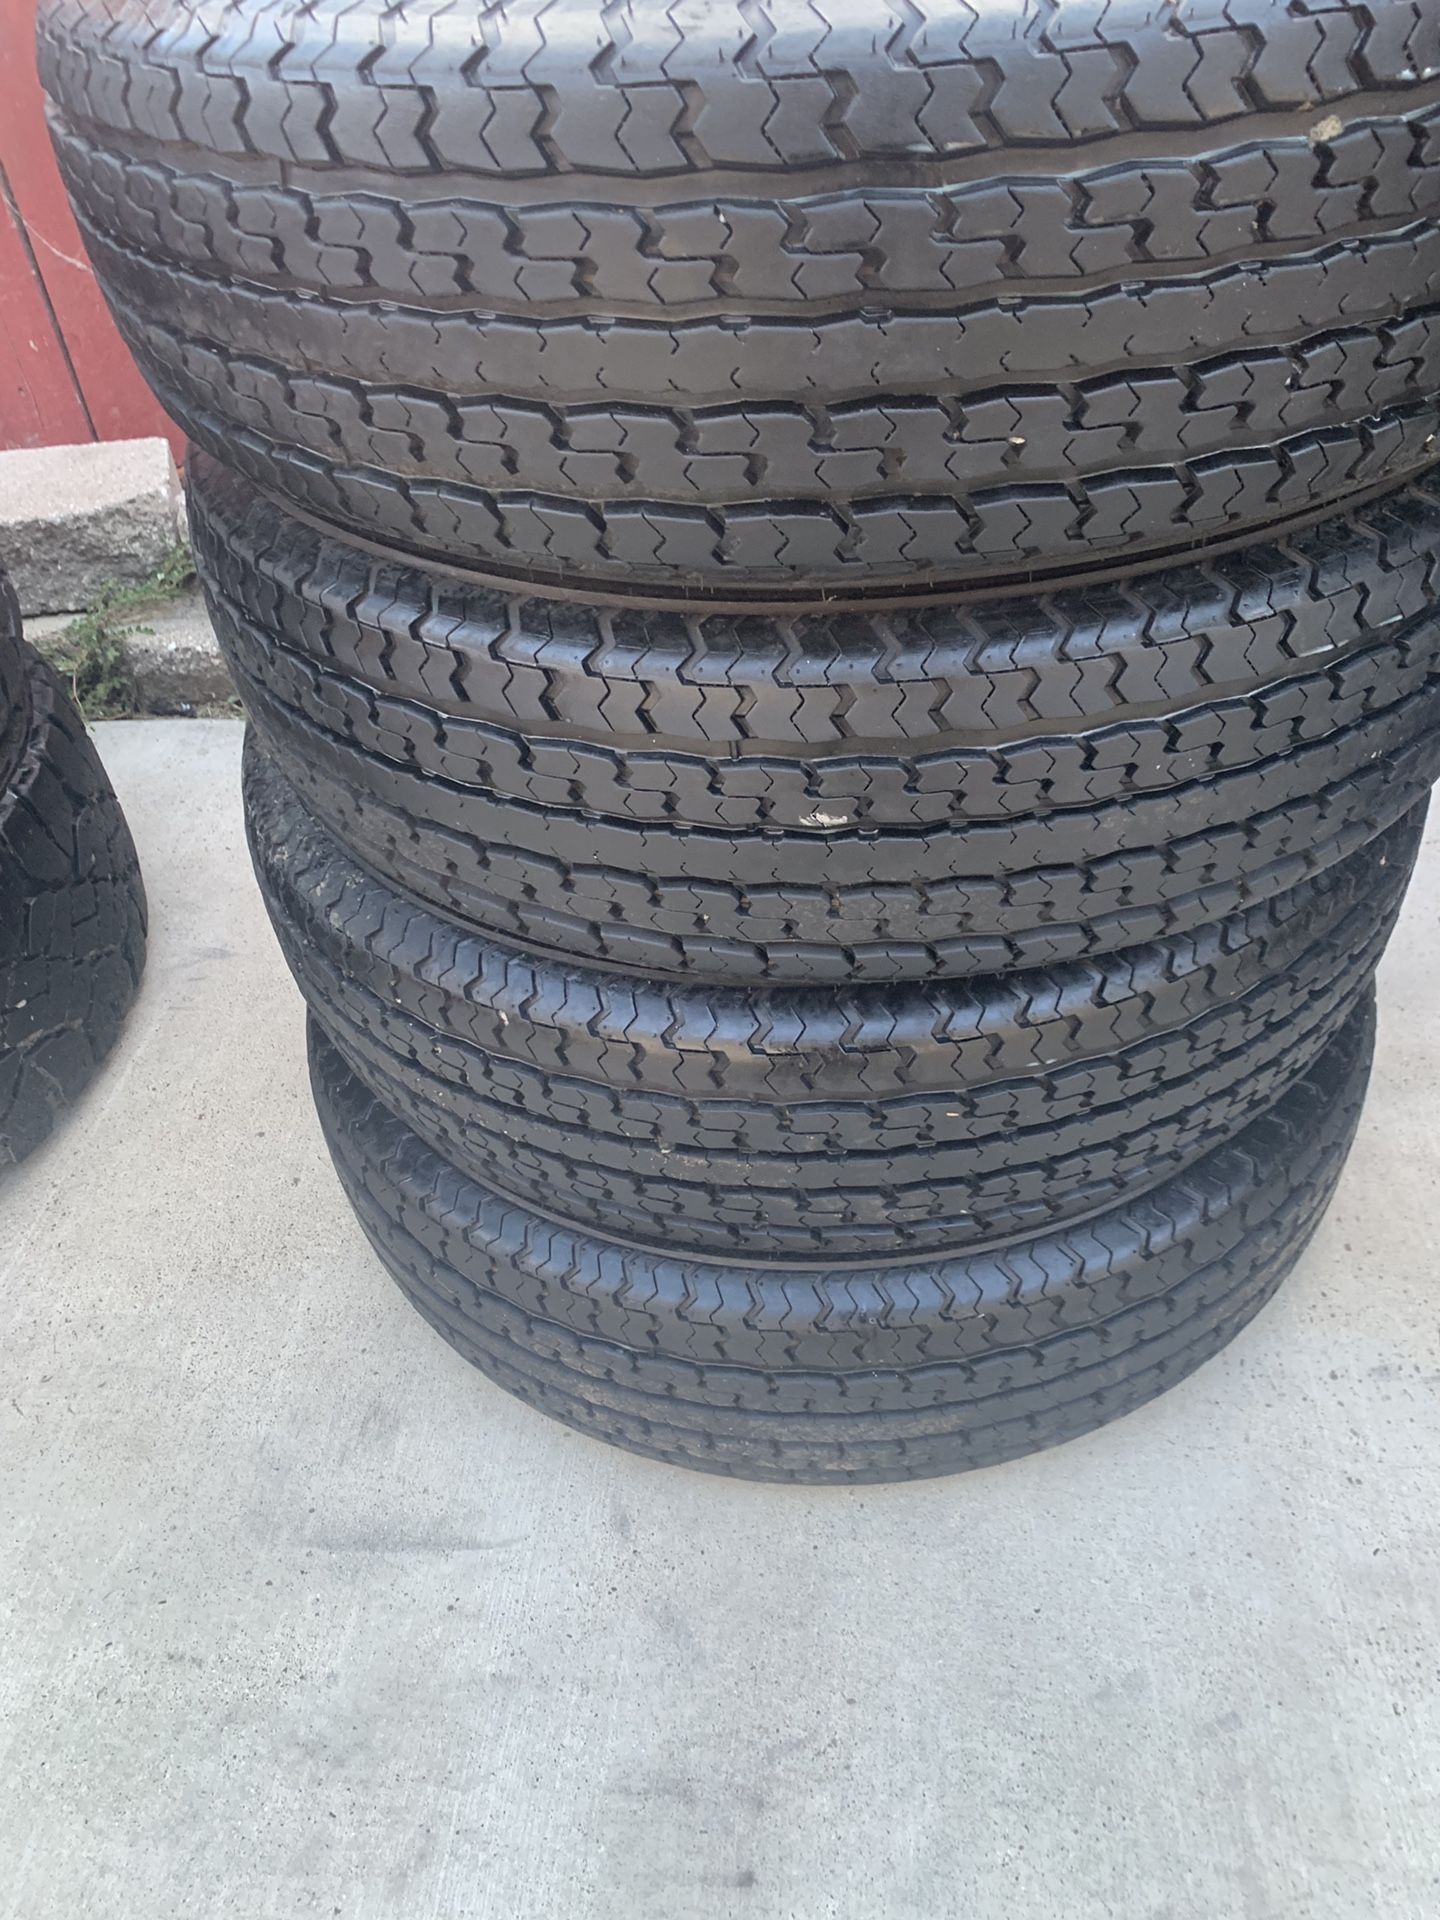 ST205-75-15 trailer tires made 2017 like new